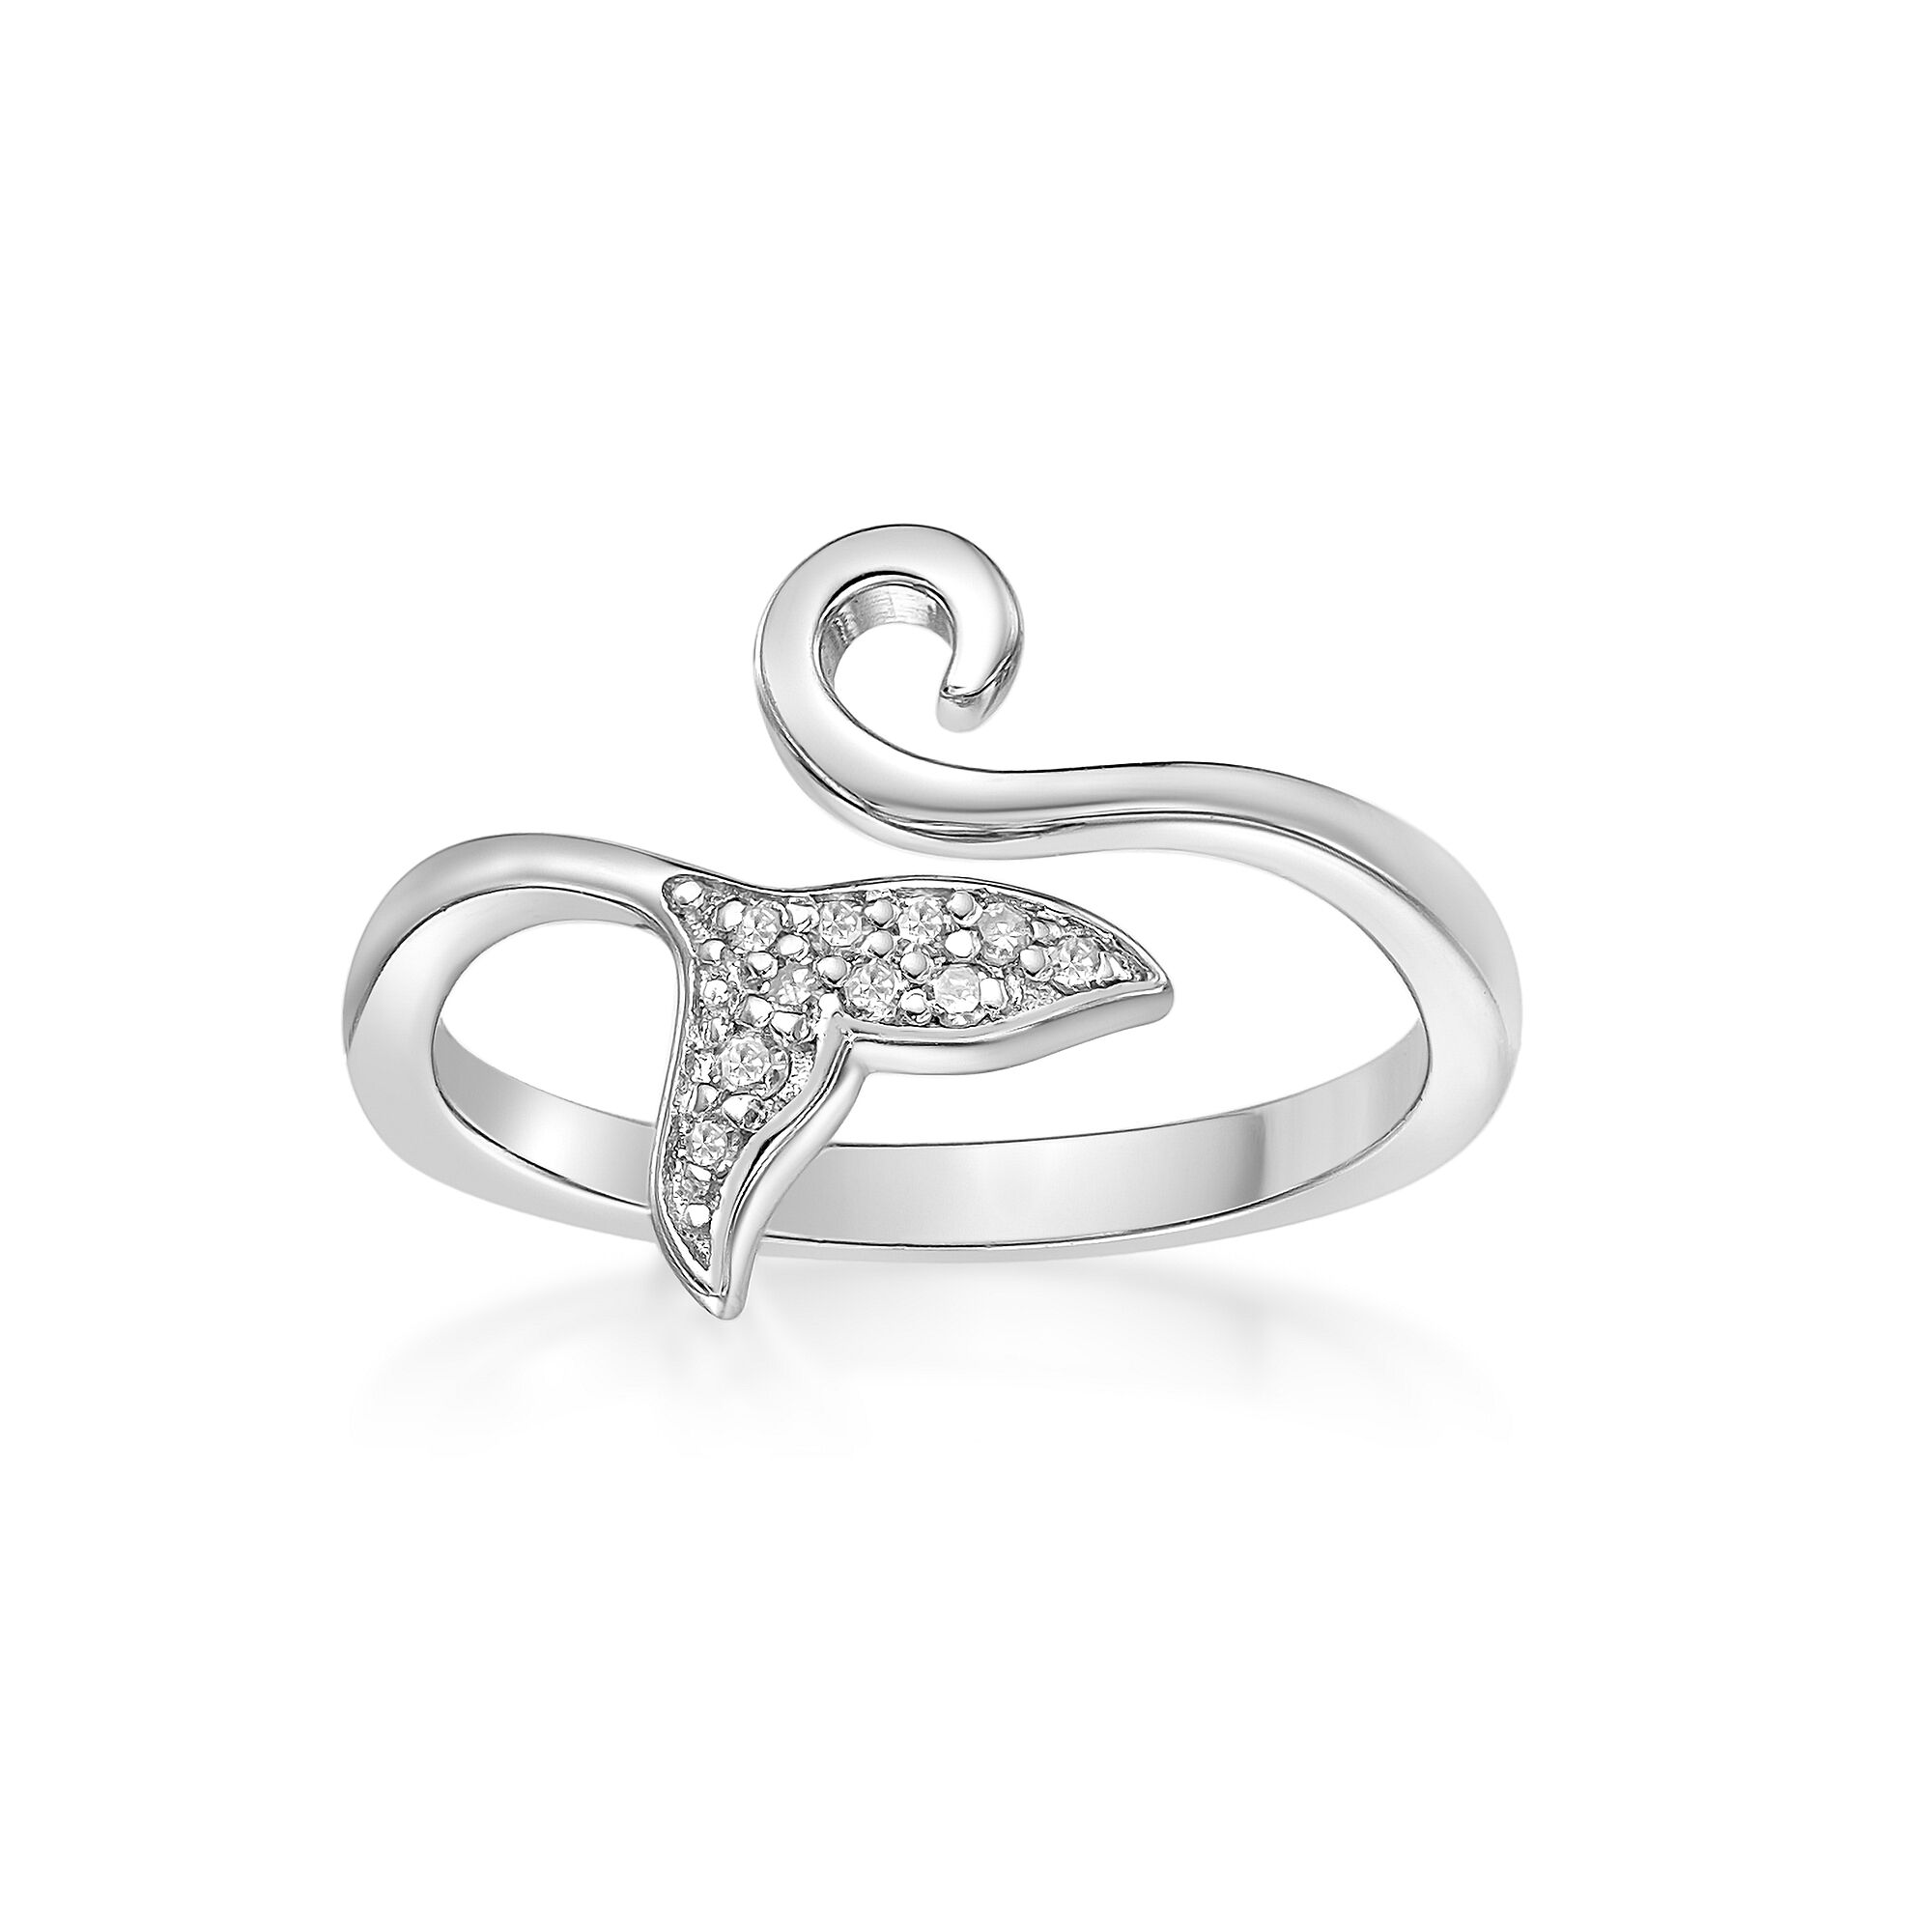 52526-toe-ring-default-collection-sterling-silver-52526-2.jpg